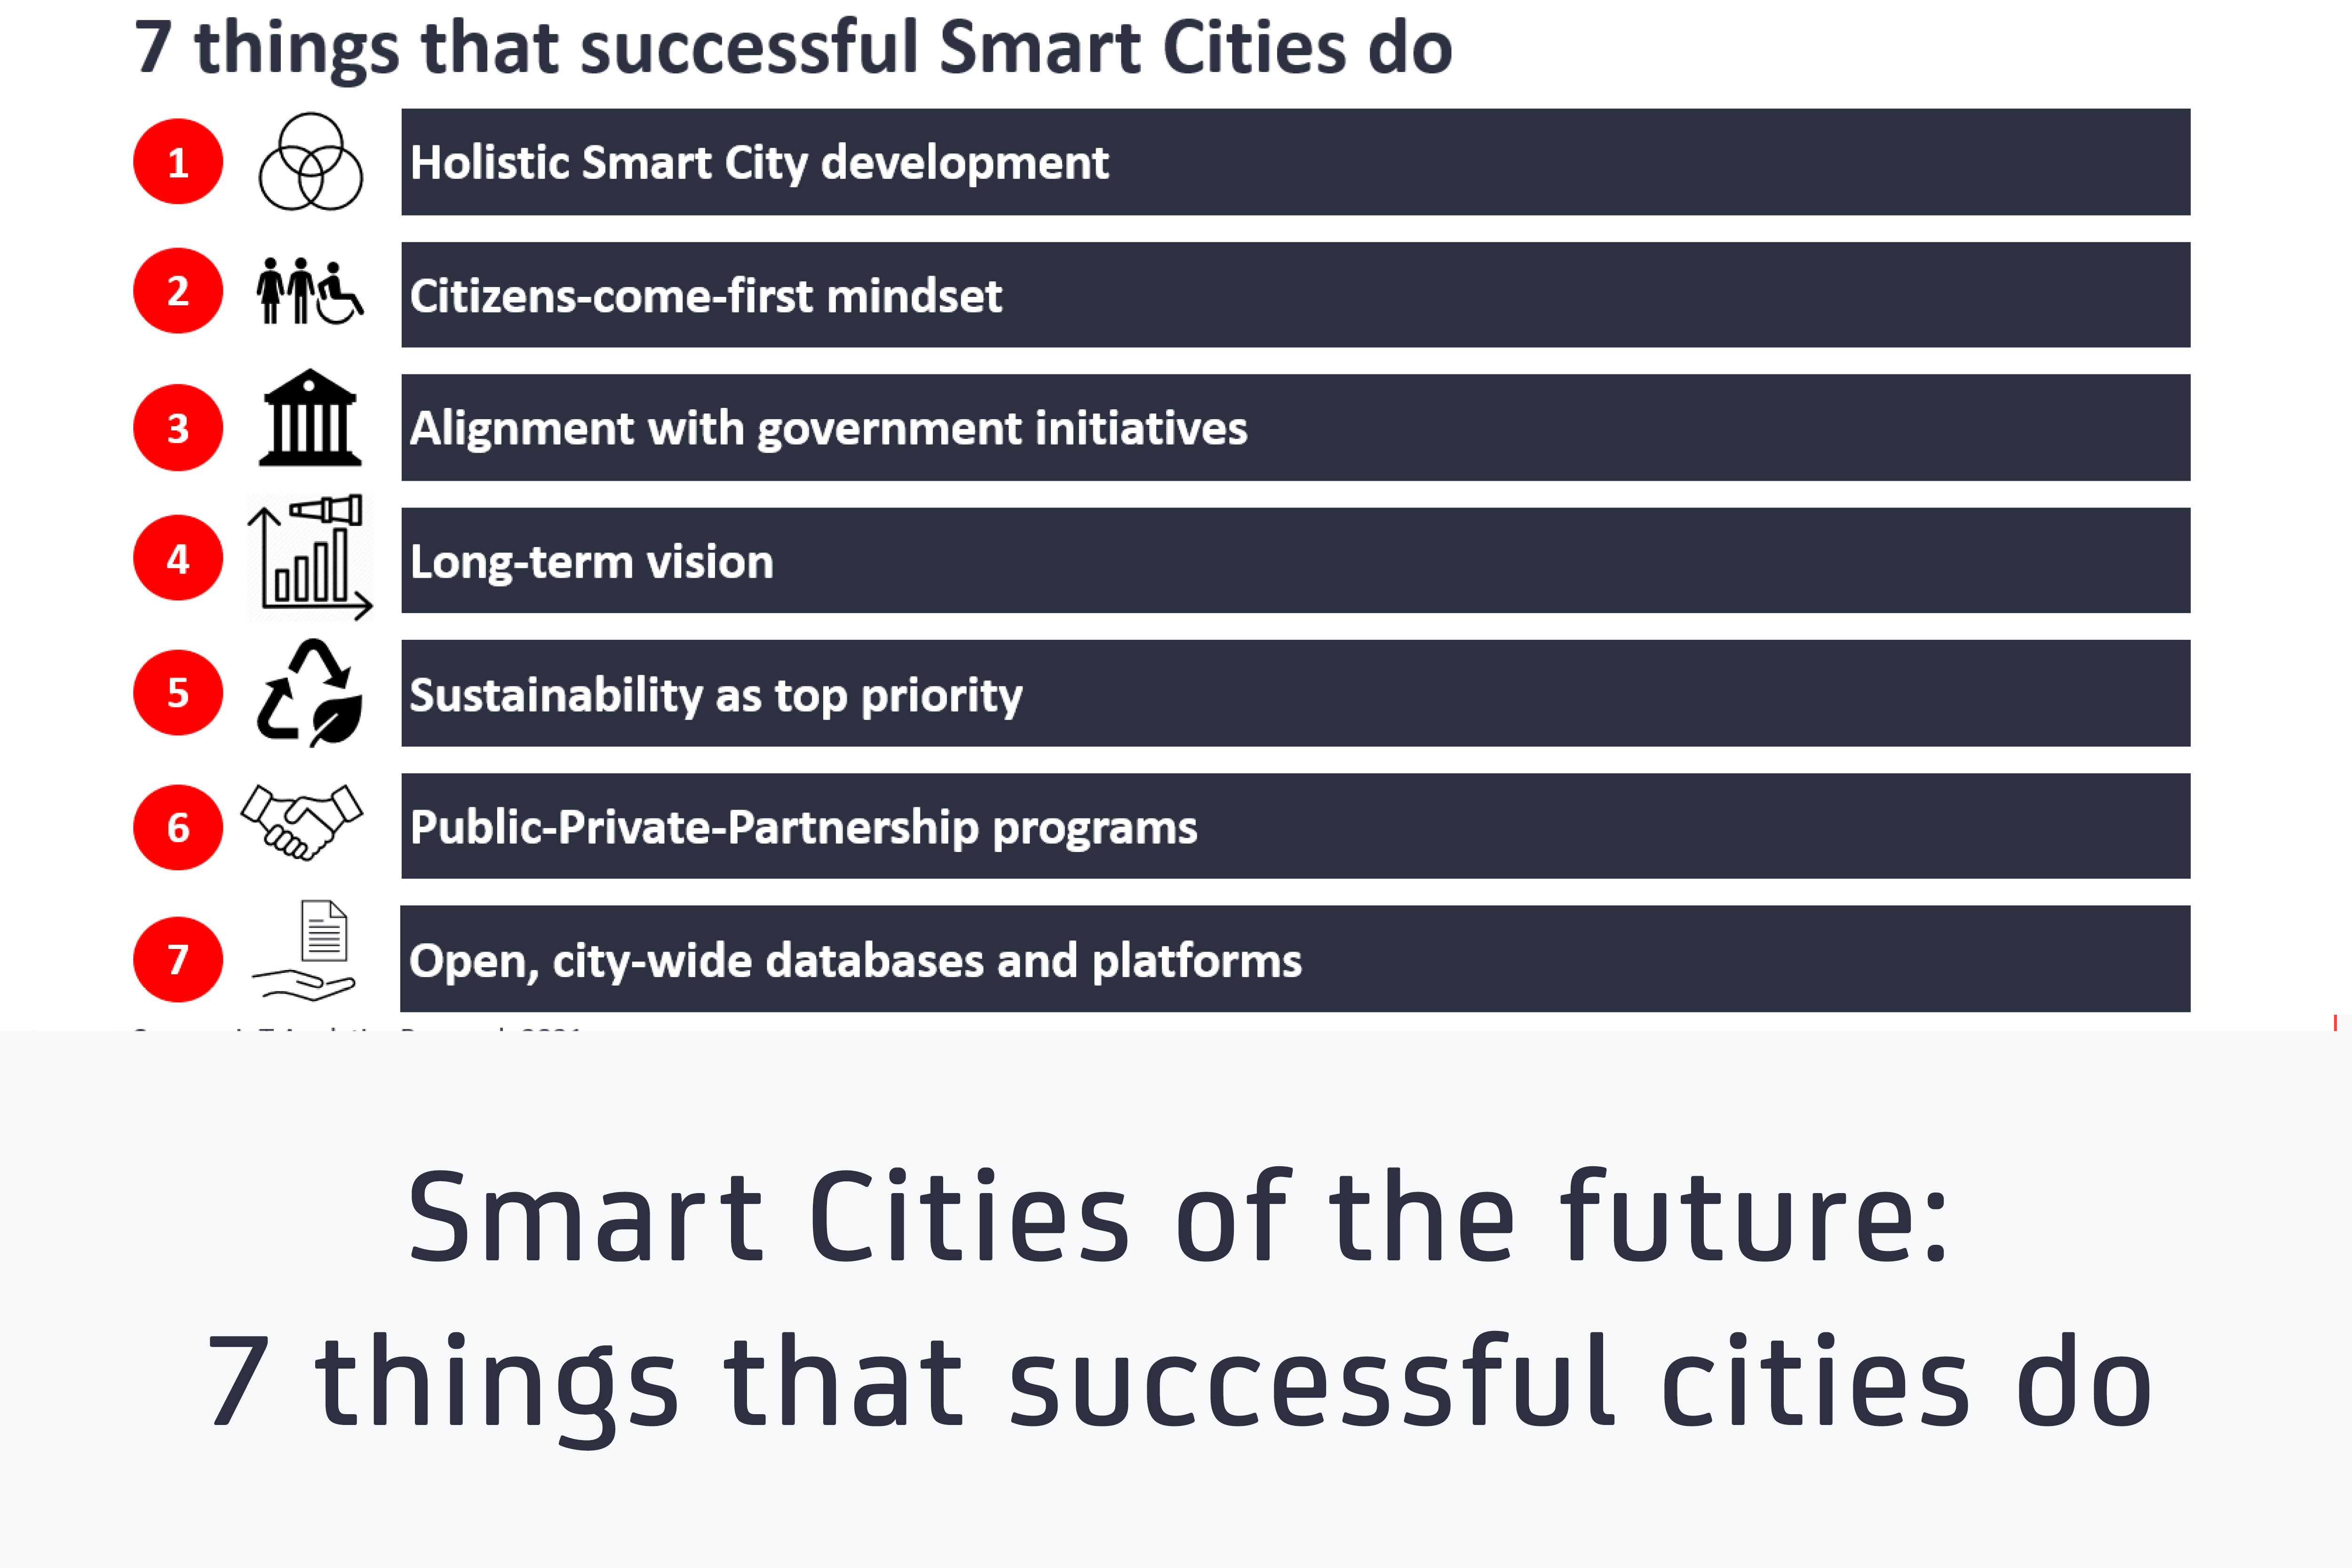 Smart Cities of the future - Feat image